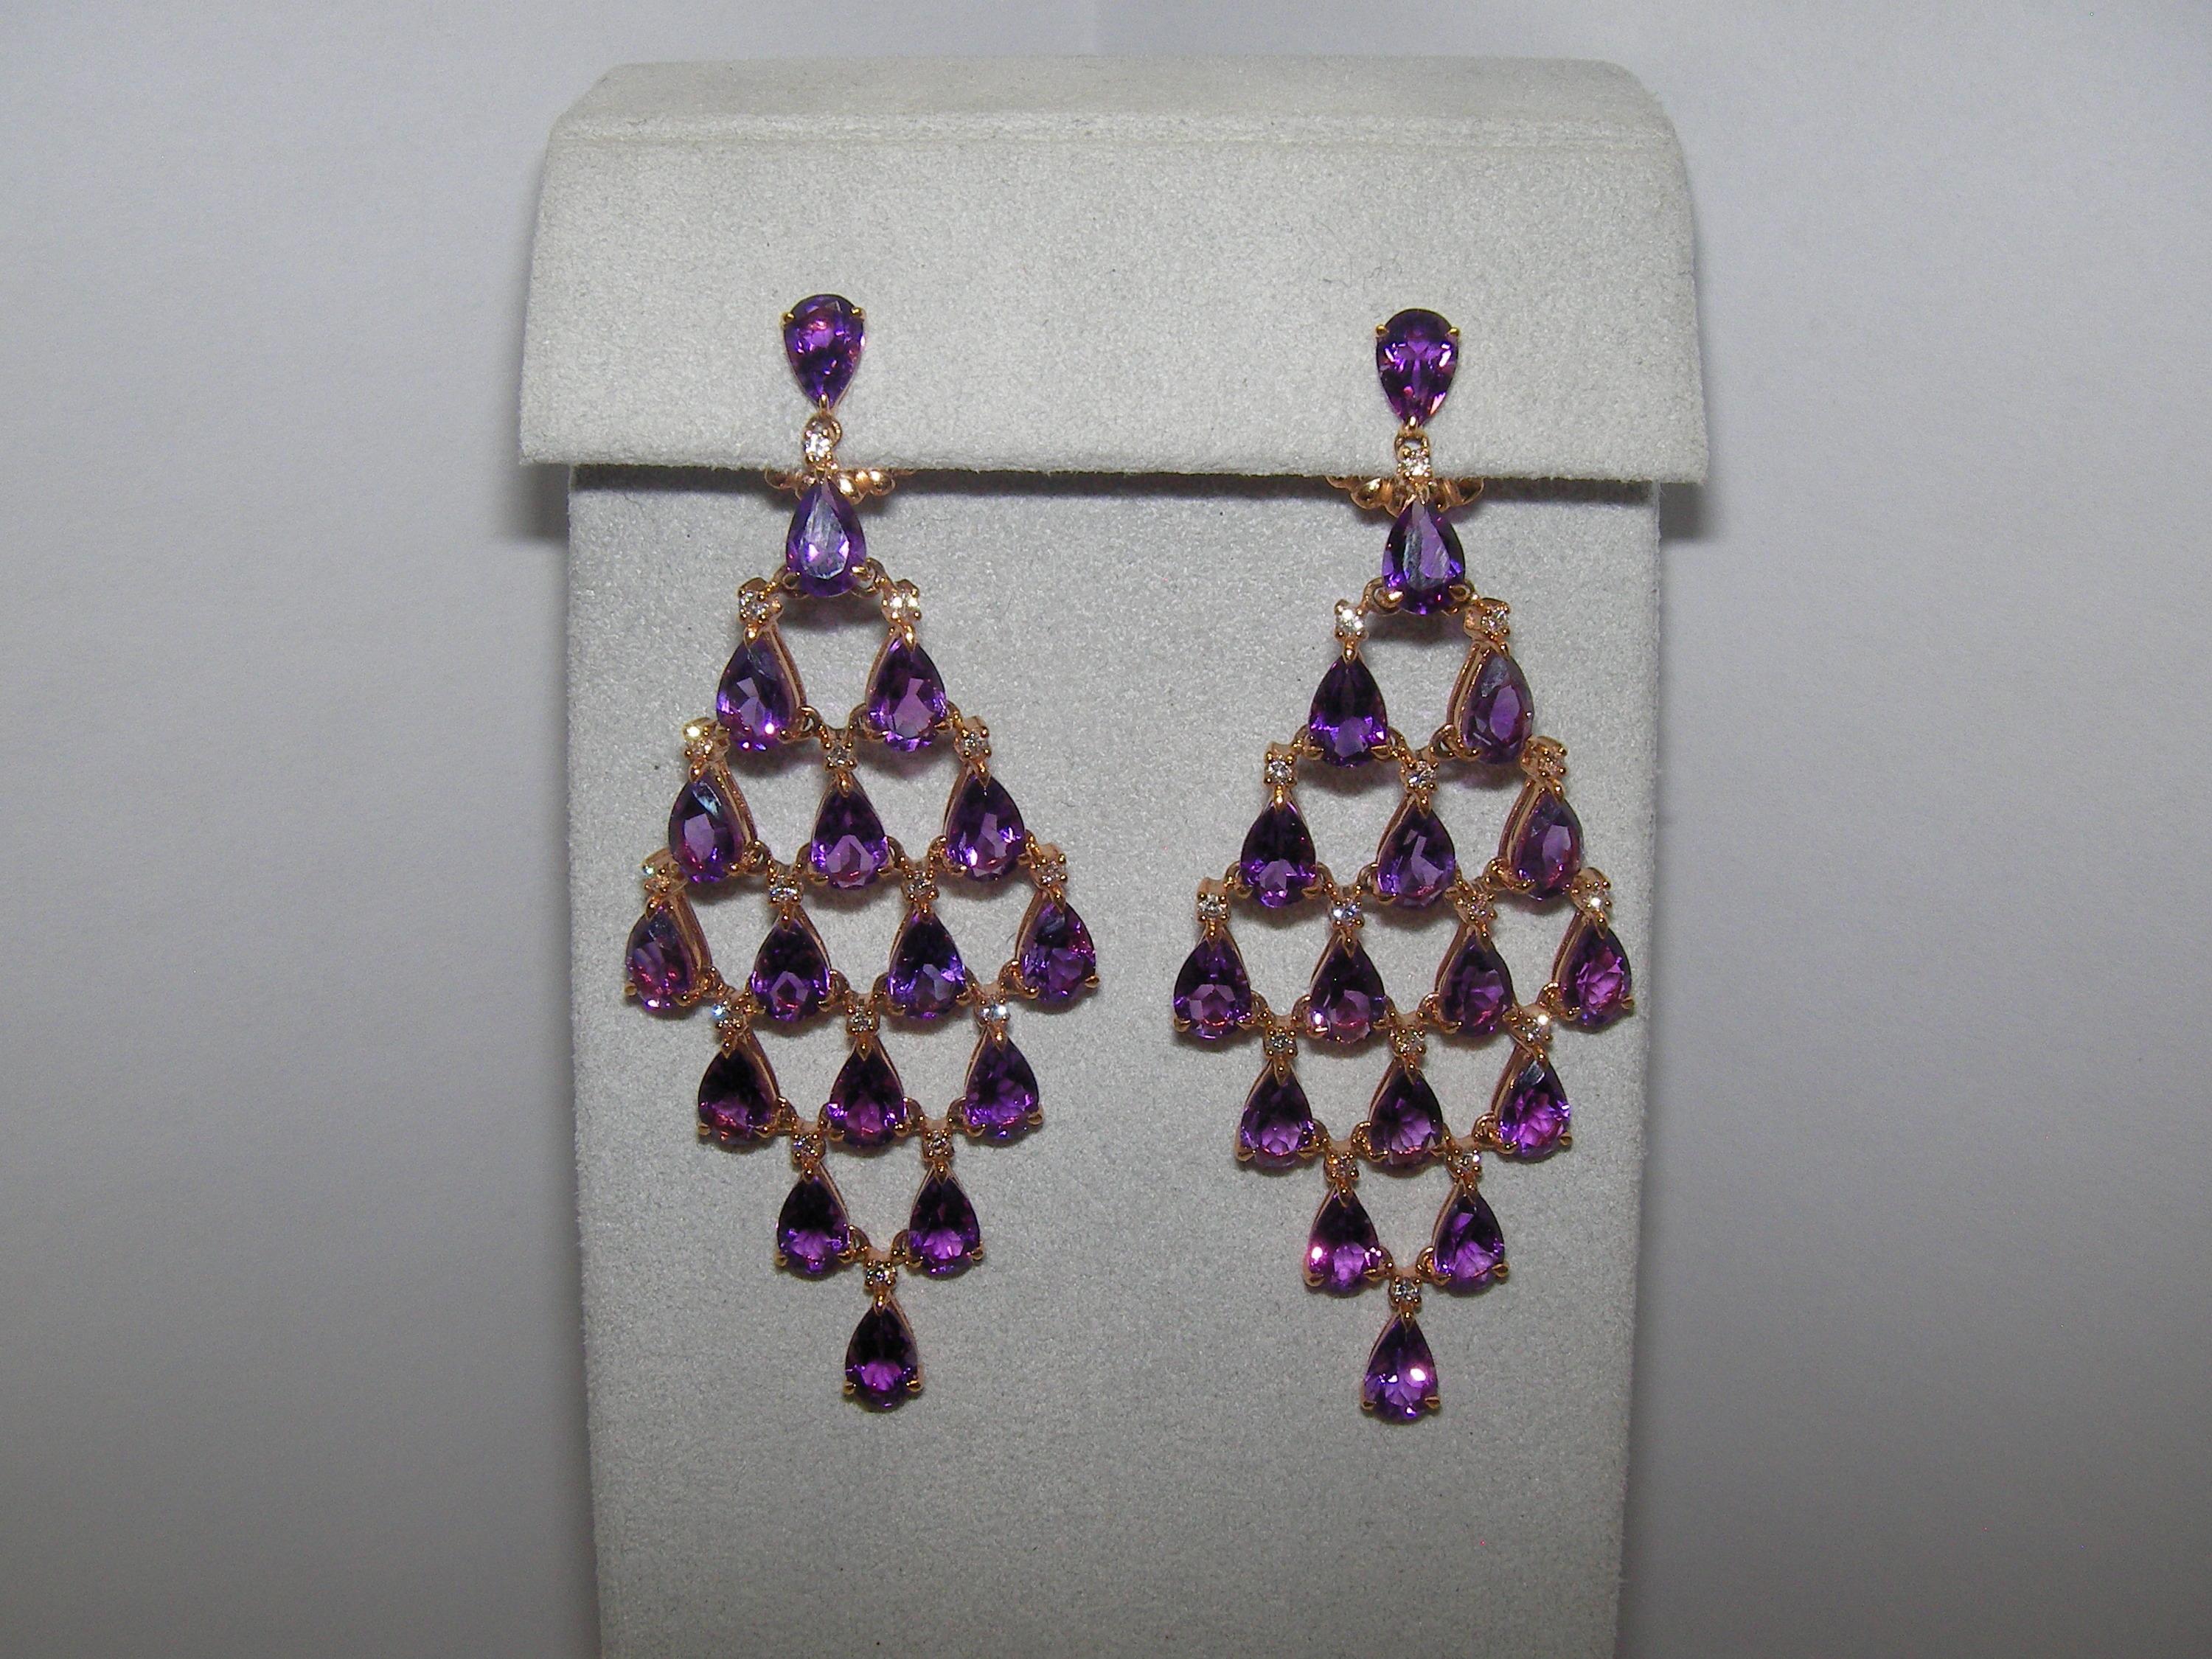 A dazzling pair of 18 Karat Rose Gold Dangle Earrings encrusted with Diamonds accenting each vivid Amethyst stone. 


34 Amethyst 12,92 Carat
32 Diamonds 0.44 Carat


Founded in 1974, Gianni Lazzaro is a family-owned jewelery company based out of